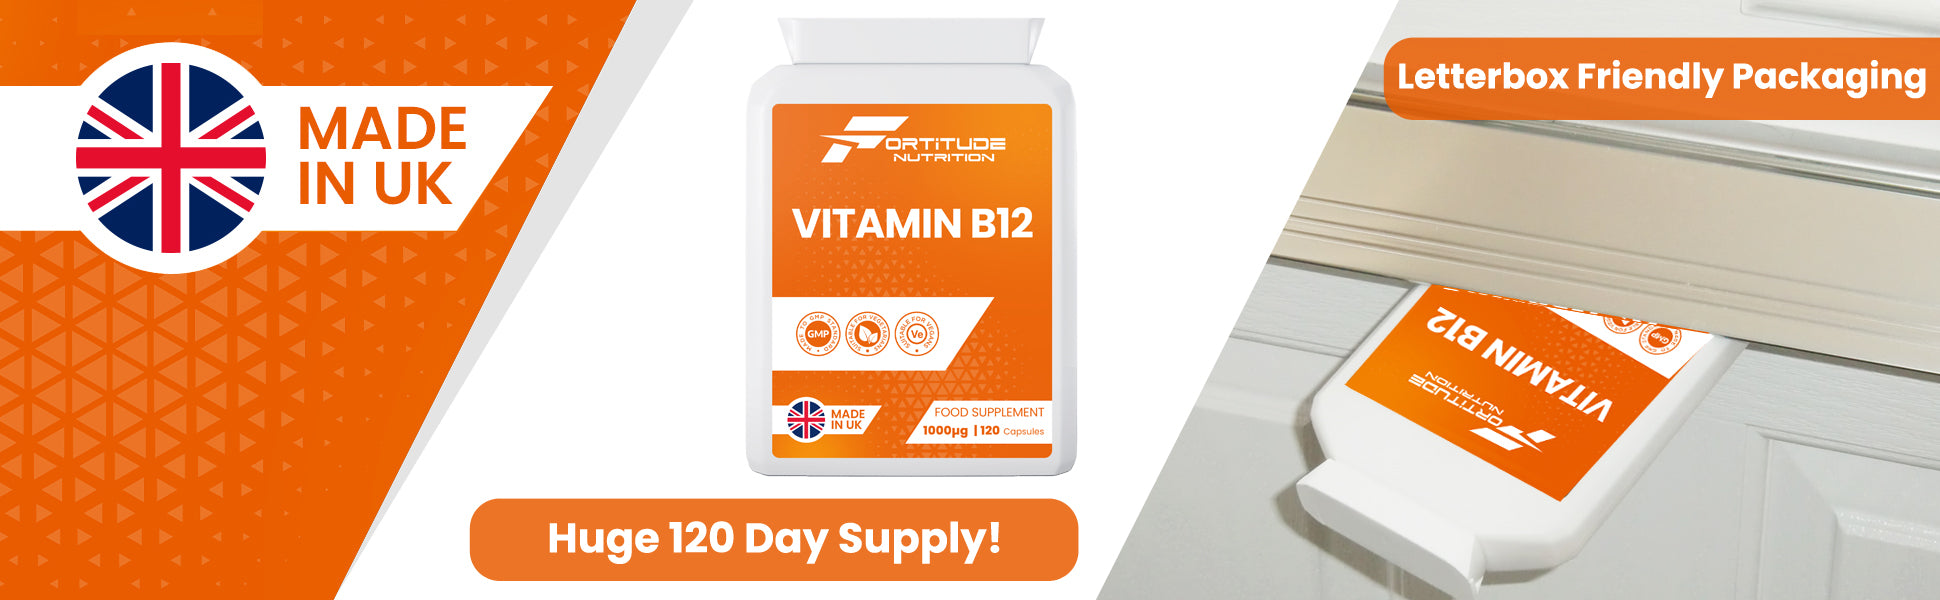 Vitamin B12 Supplements in Letterbox Friendly Packaging